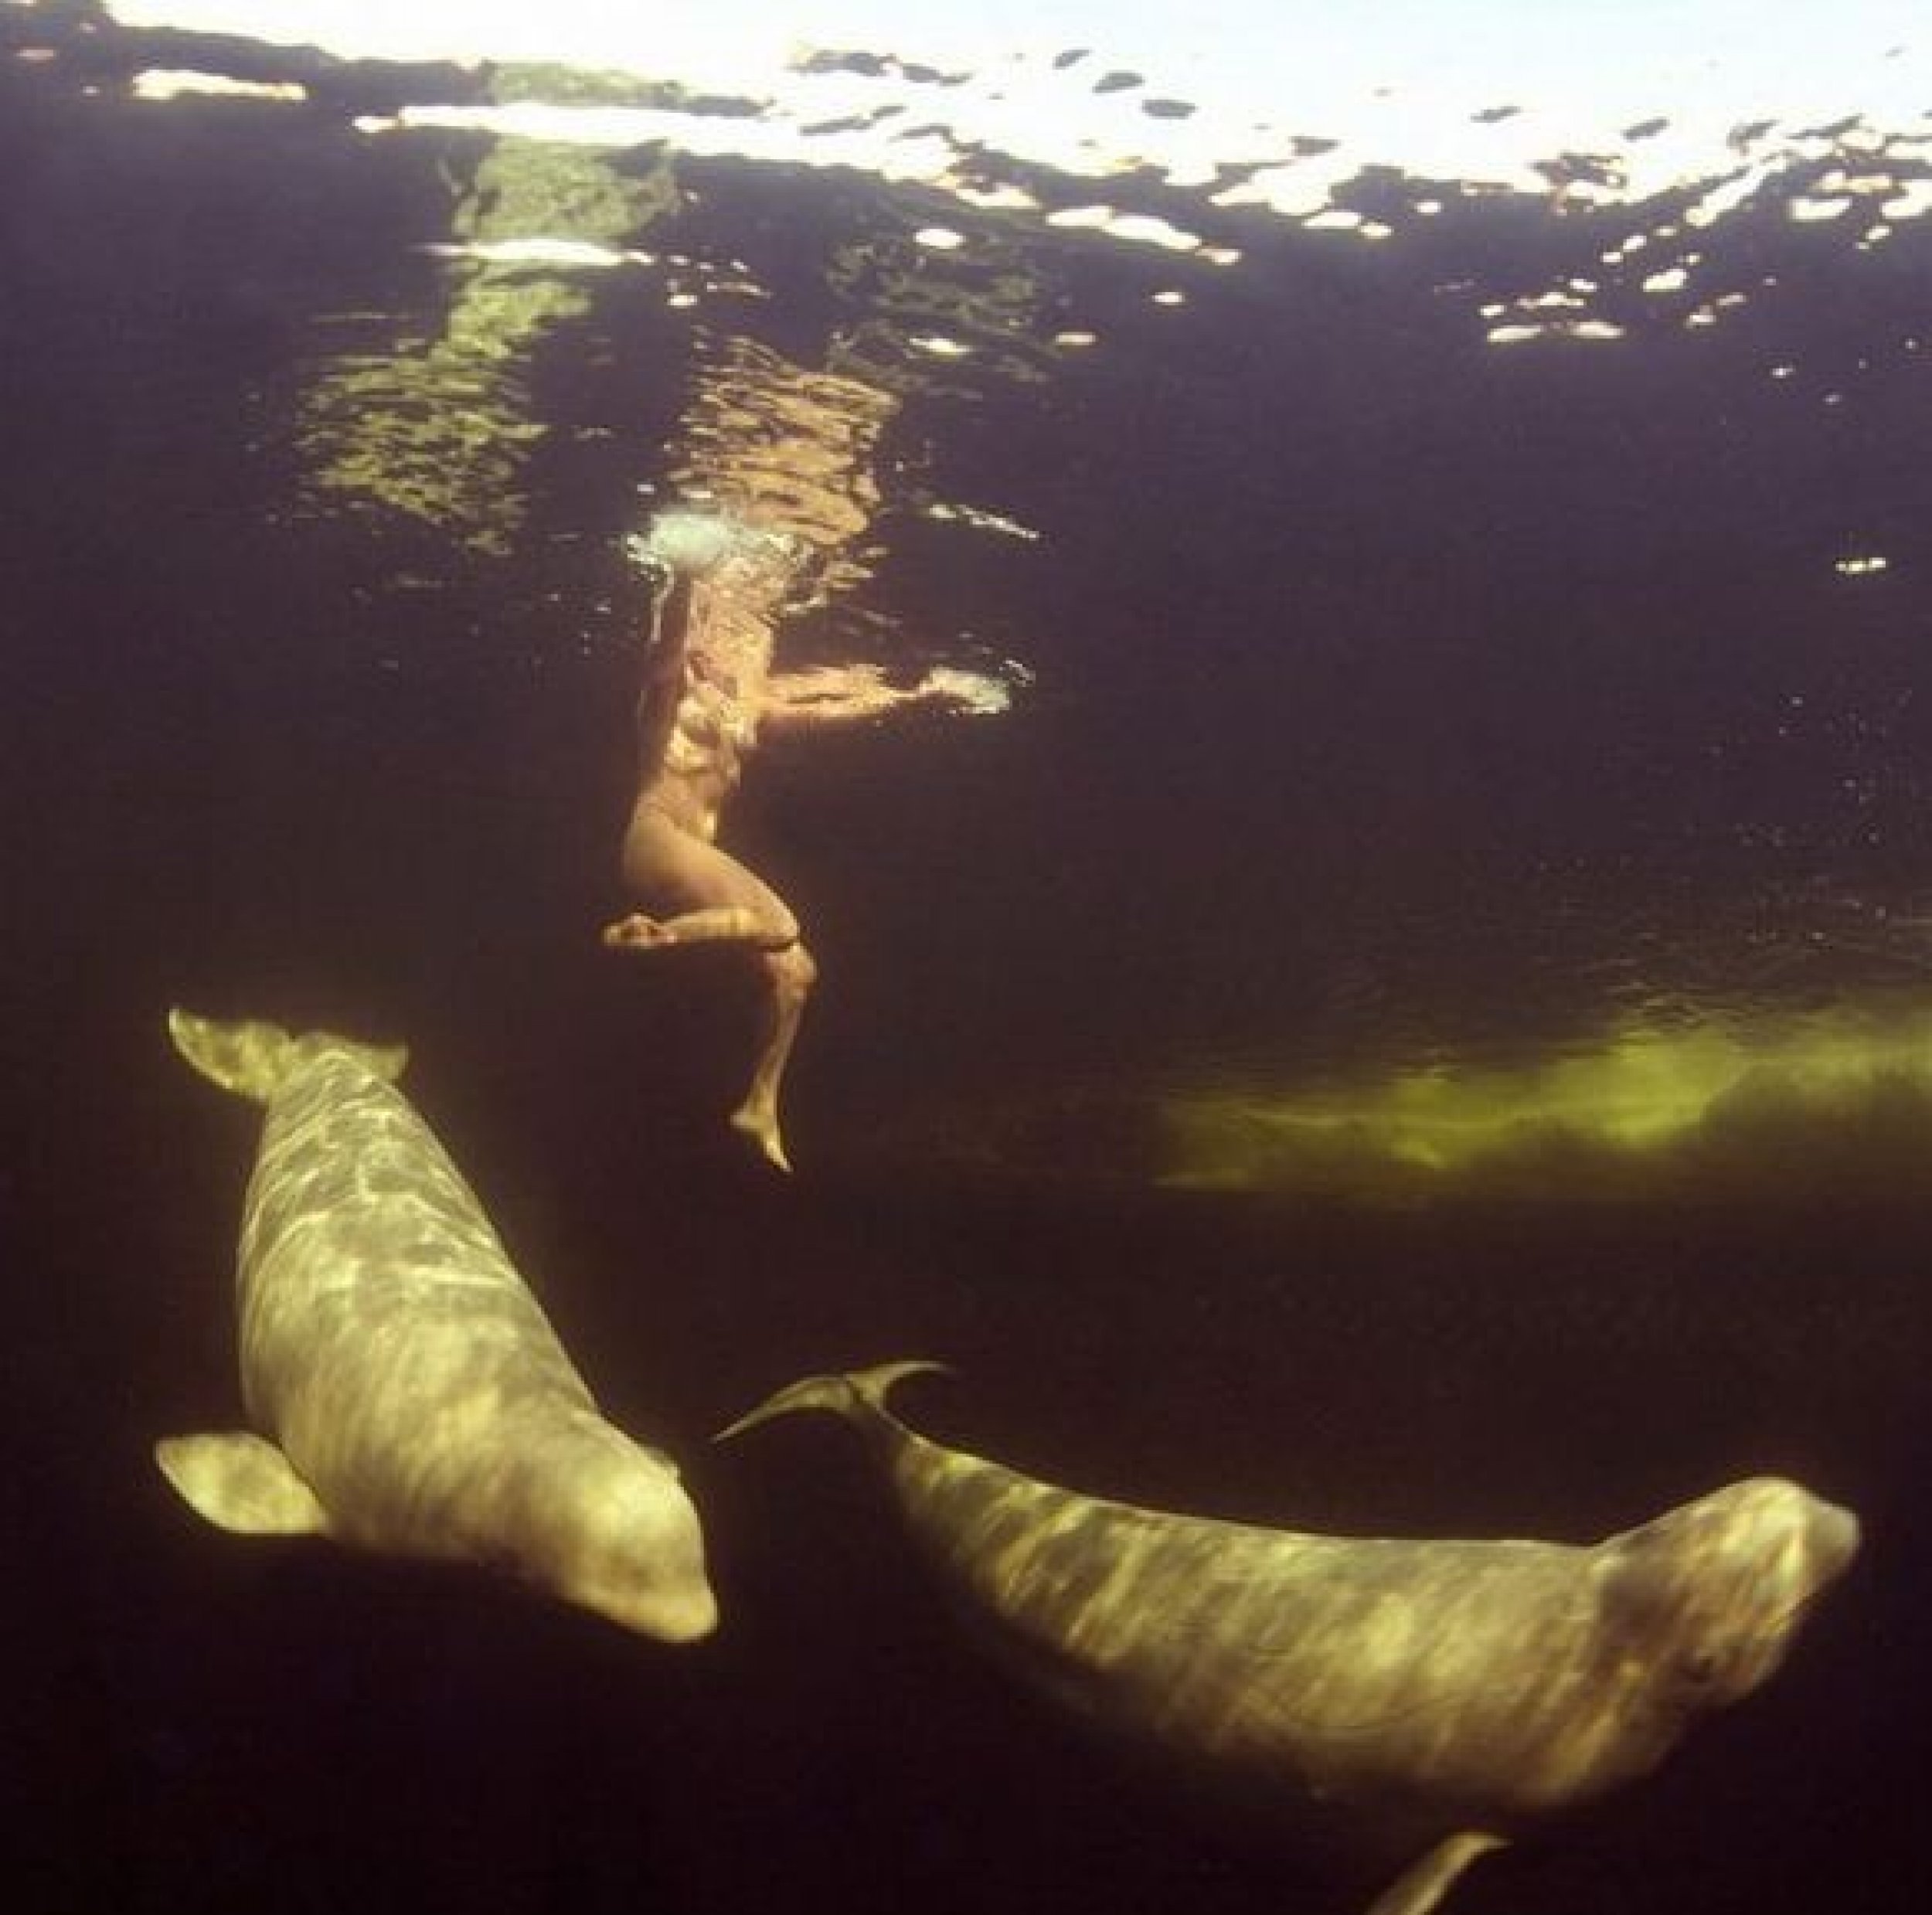 Breathtaking photos of womans nude swim with Beluga whales Warning Graphic images